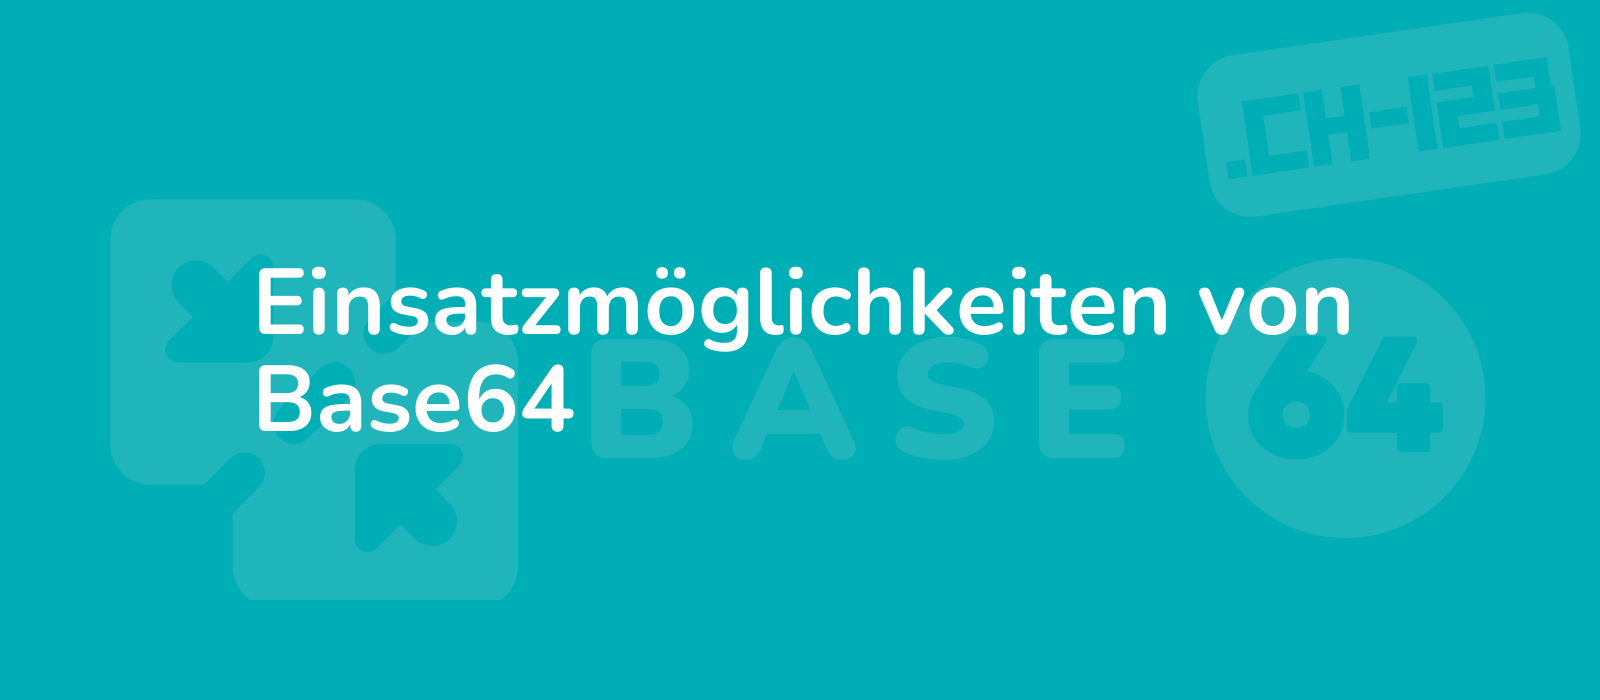 minimalist image featuring base64 applications showcasing versatility and simplicity against a clean white background